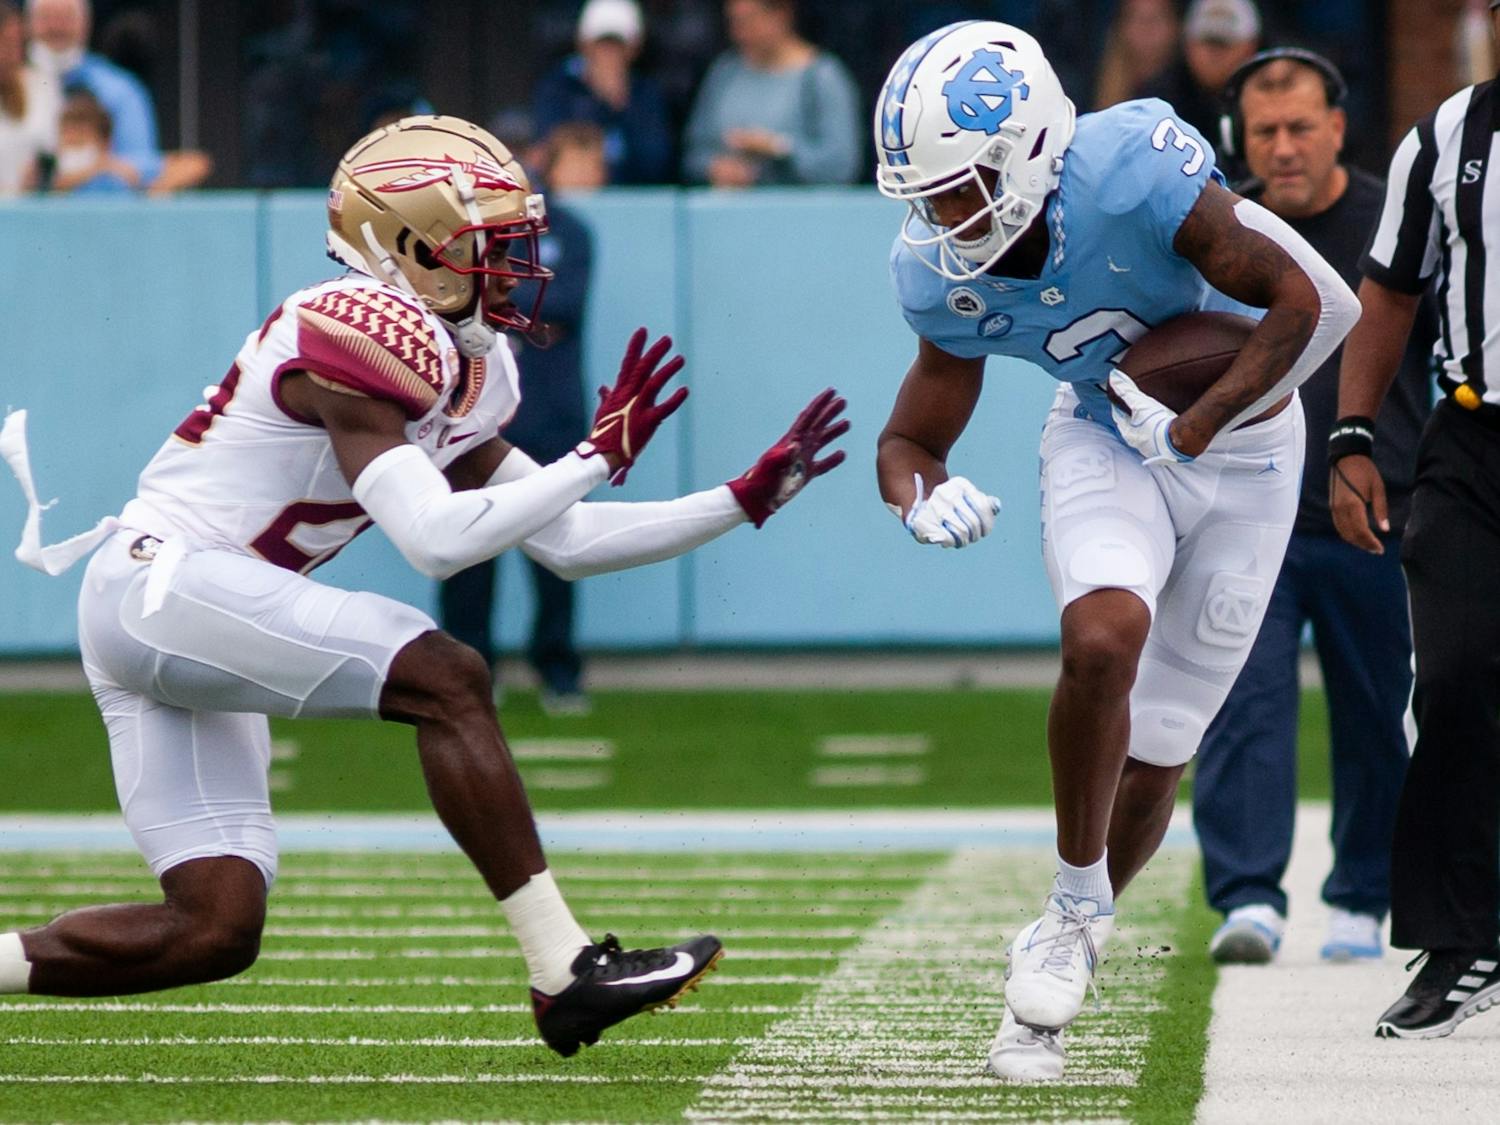 UNC football fell to Florida State 35-25 on Saturday afternoon in a home matchup at Kenan Stadium. The Tar Heels were up 10-0 until a Seminole interception that gave FSU the energy it needed to push toward a win.